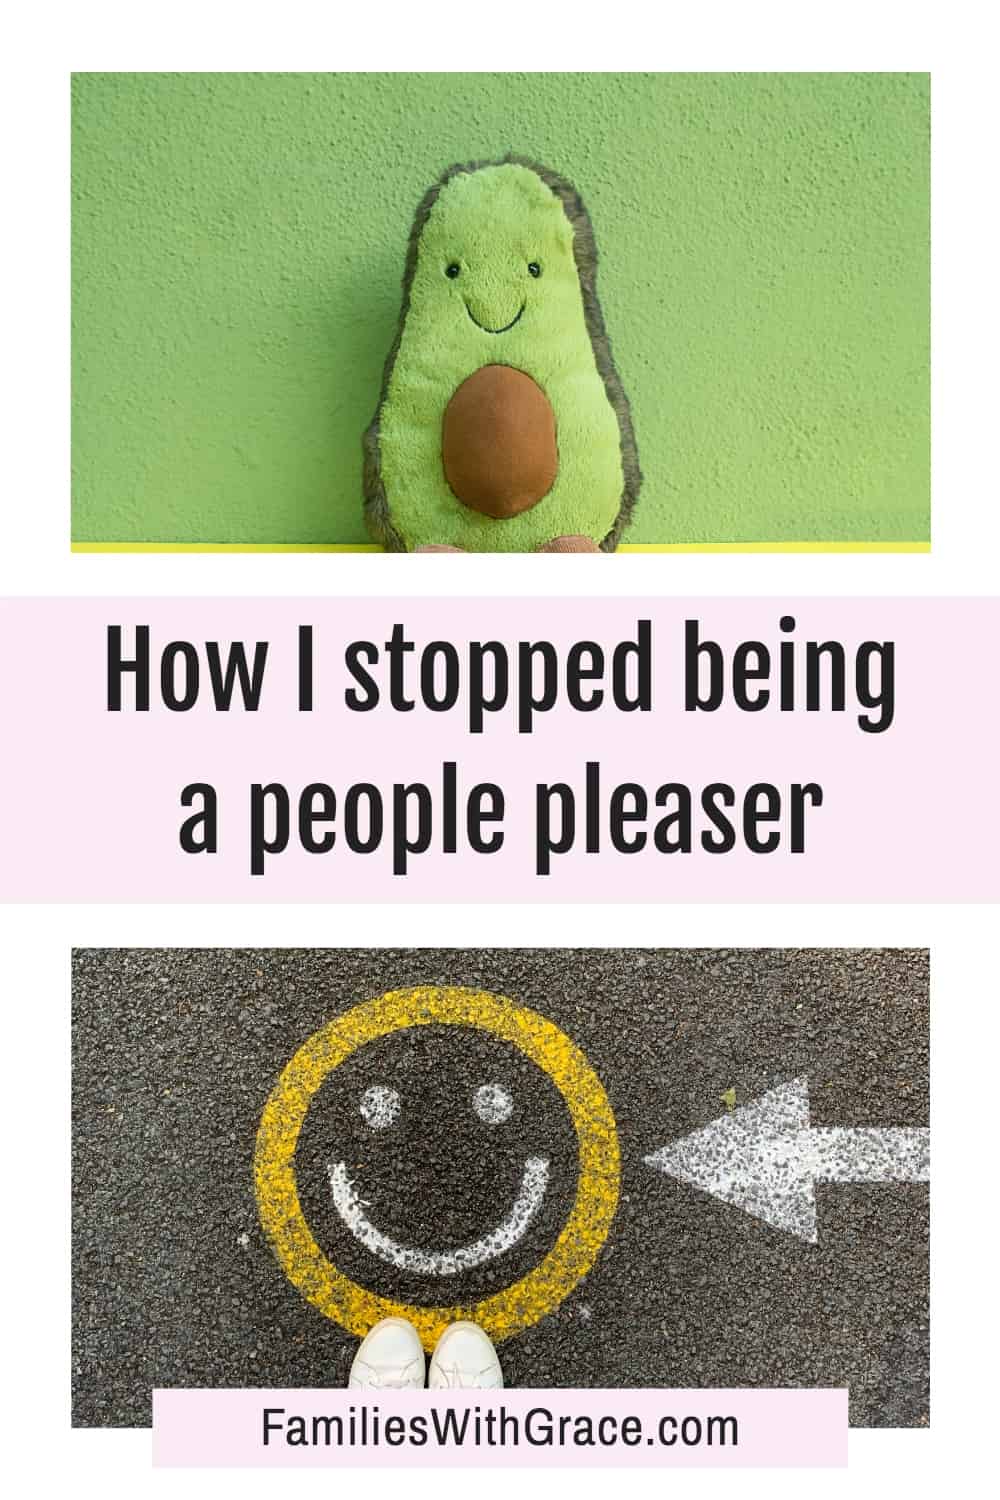 How I stopped being a people pleaser